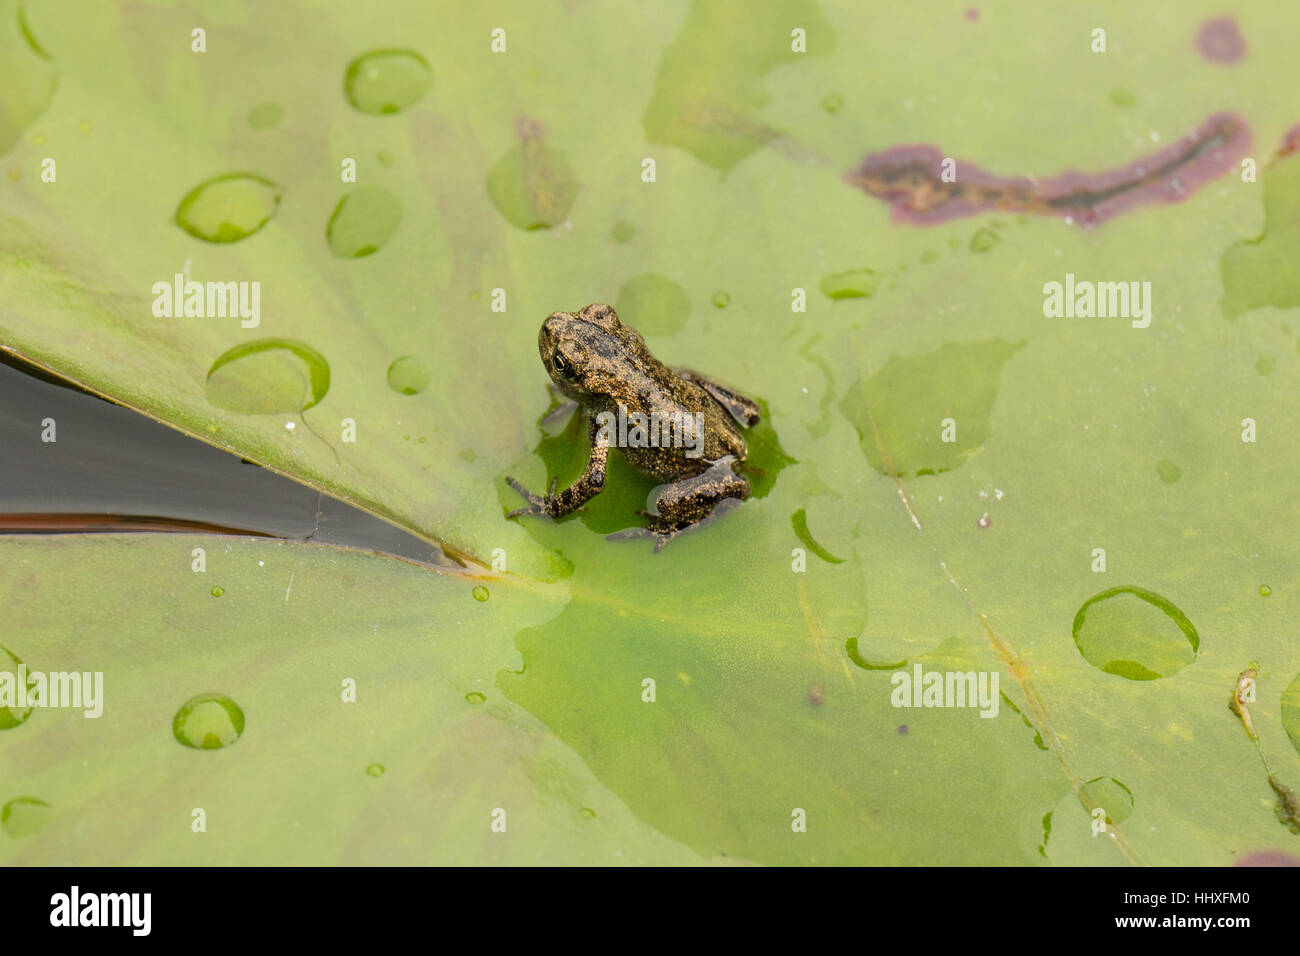 small baby common frog sitting on a waterlily in pond next to water droplets Stock Photo